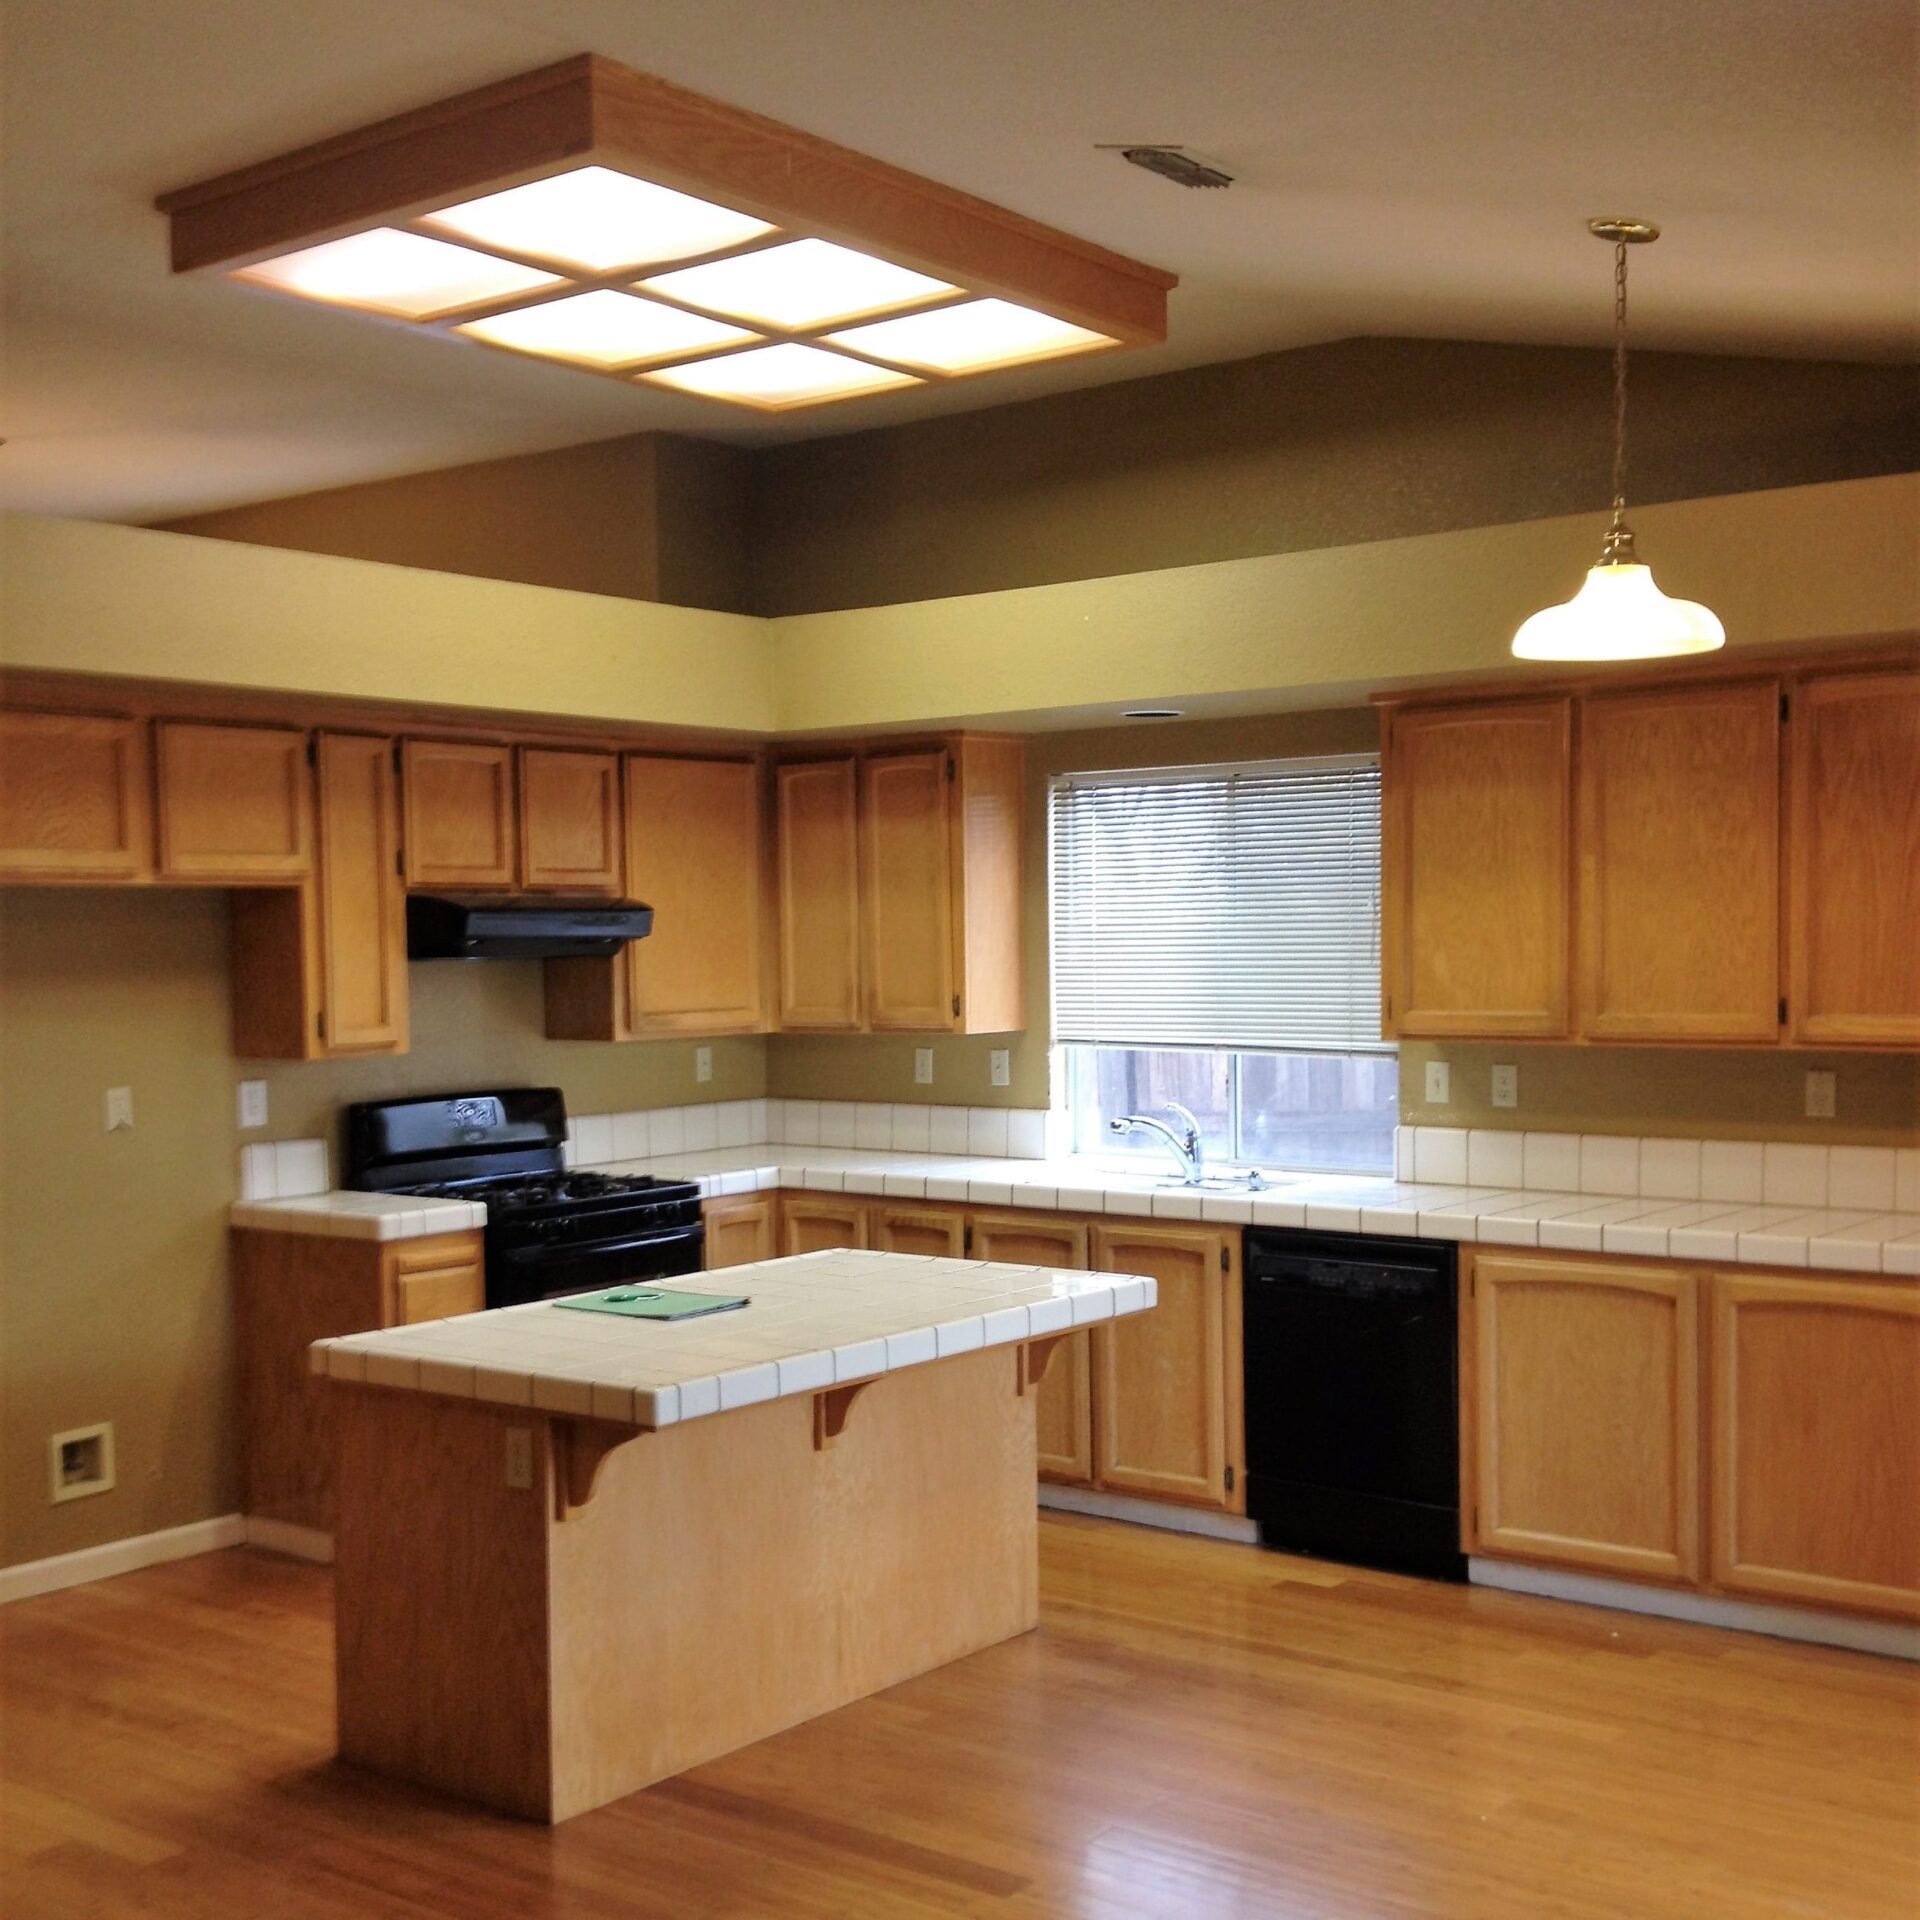 An image of unfurnished kitchen